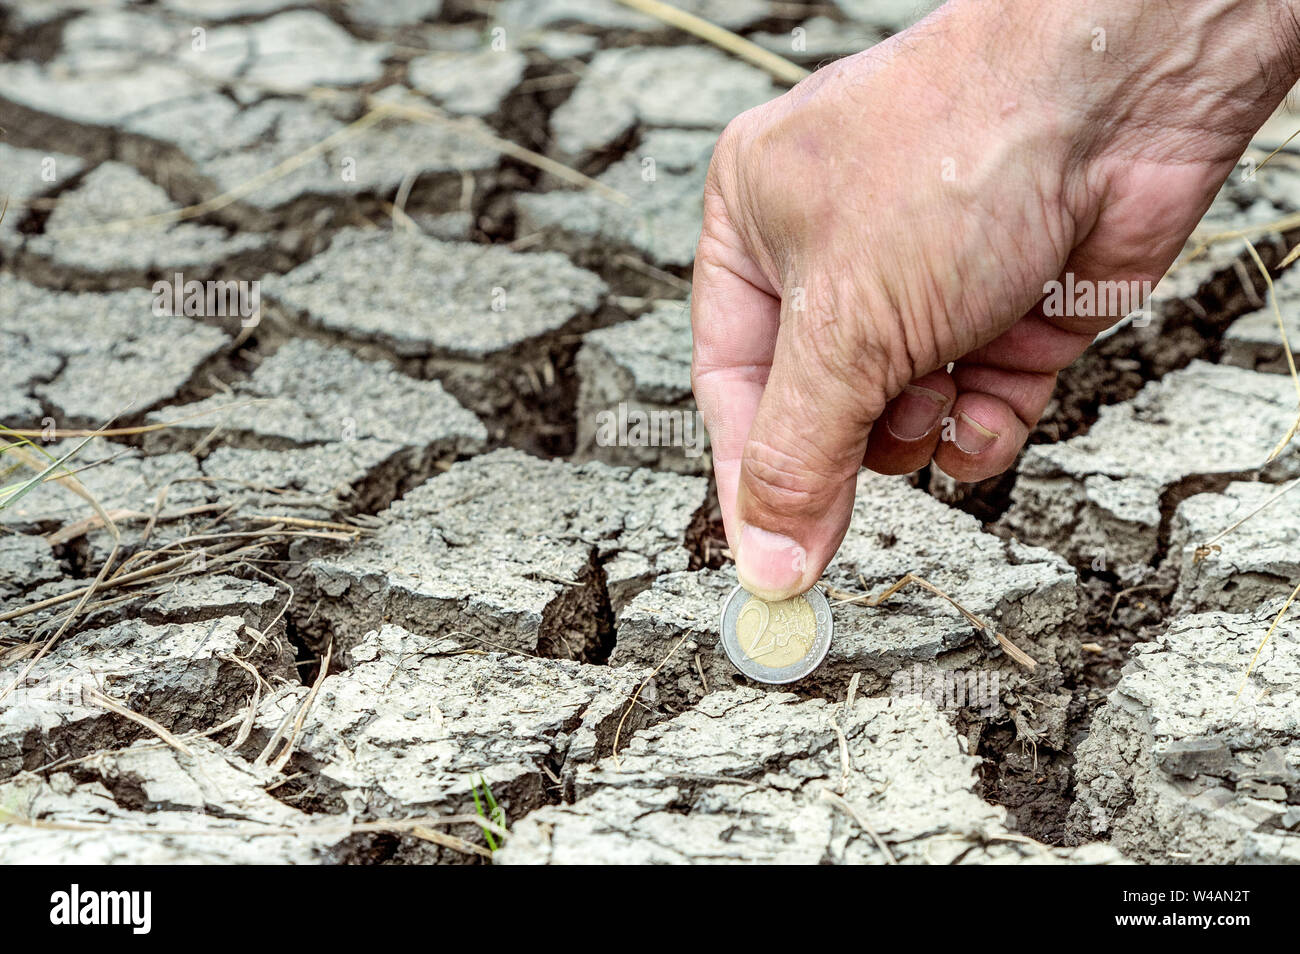 How much does climate change cost? Climate change leads to extreme weather events which cause considerable economic damage. A hand puts a two-euro coi Stock Photo